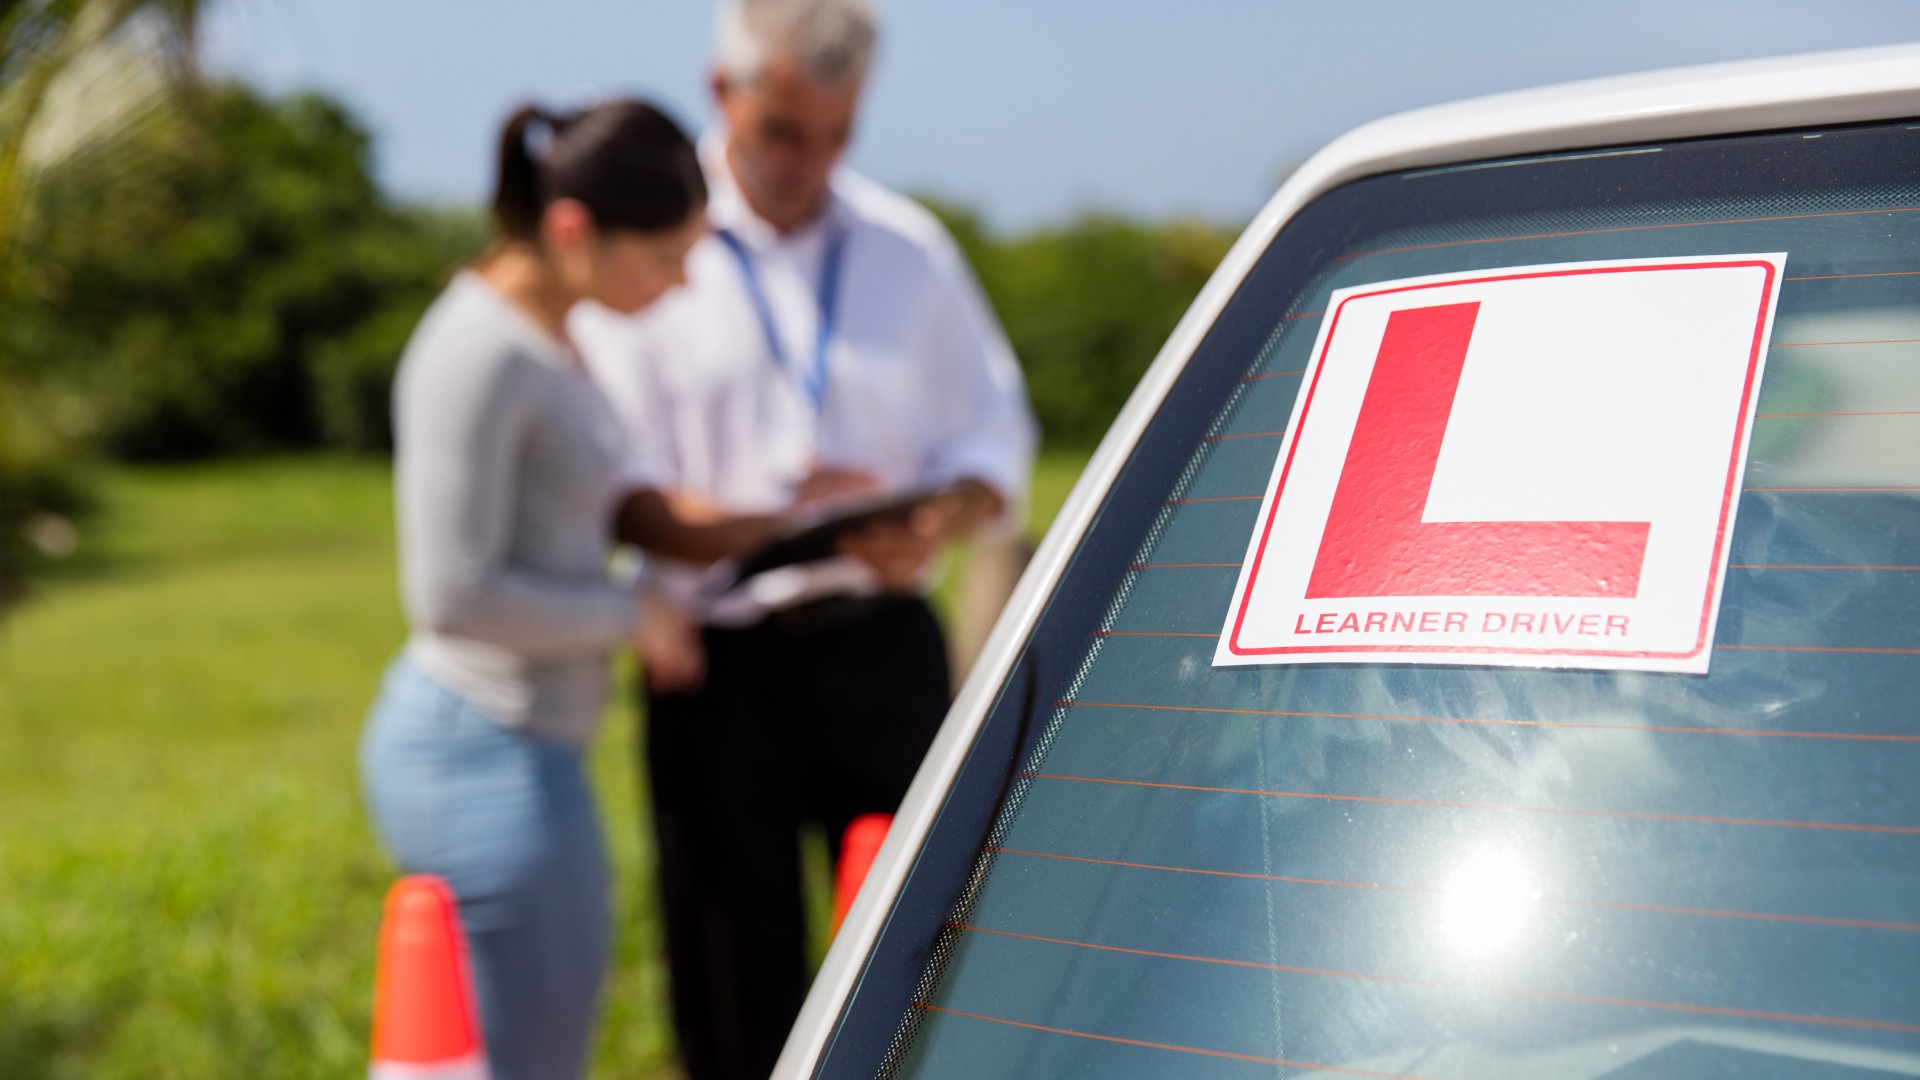 Learner drivers pay less up North